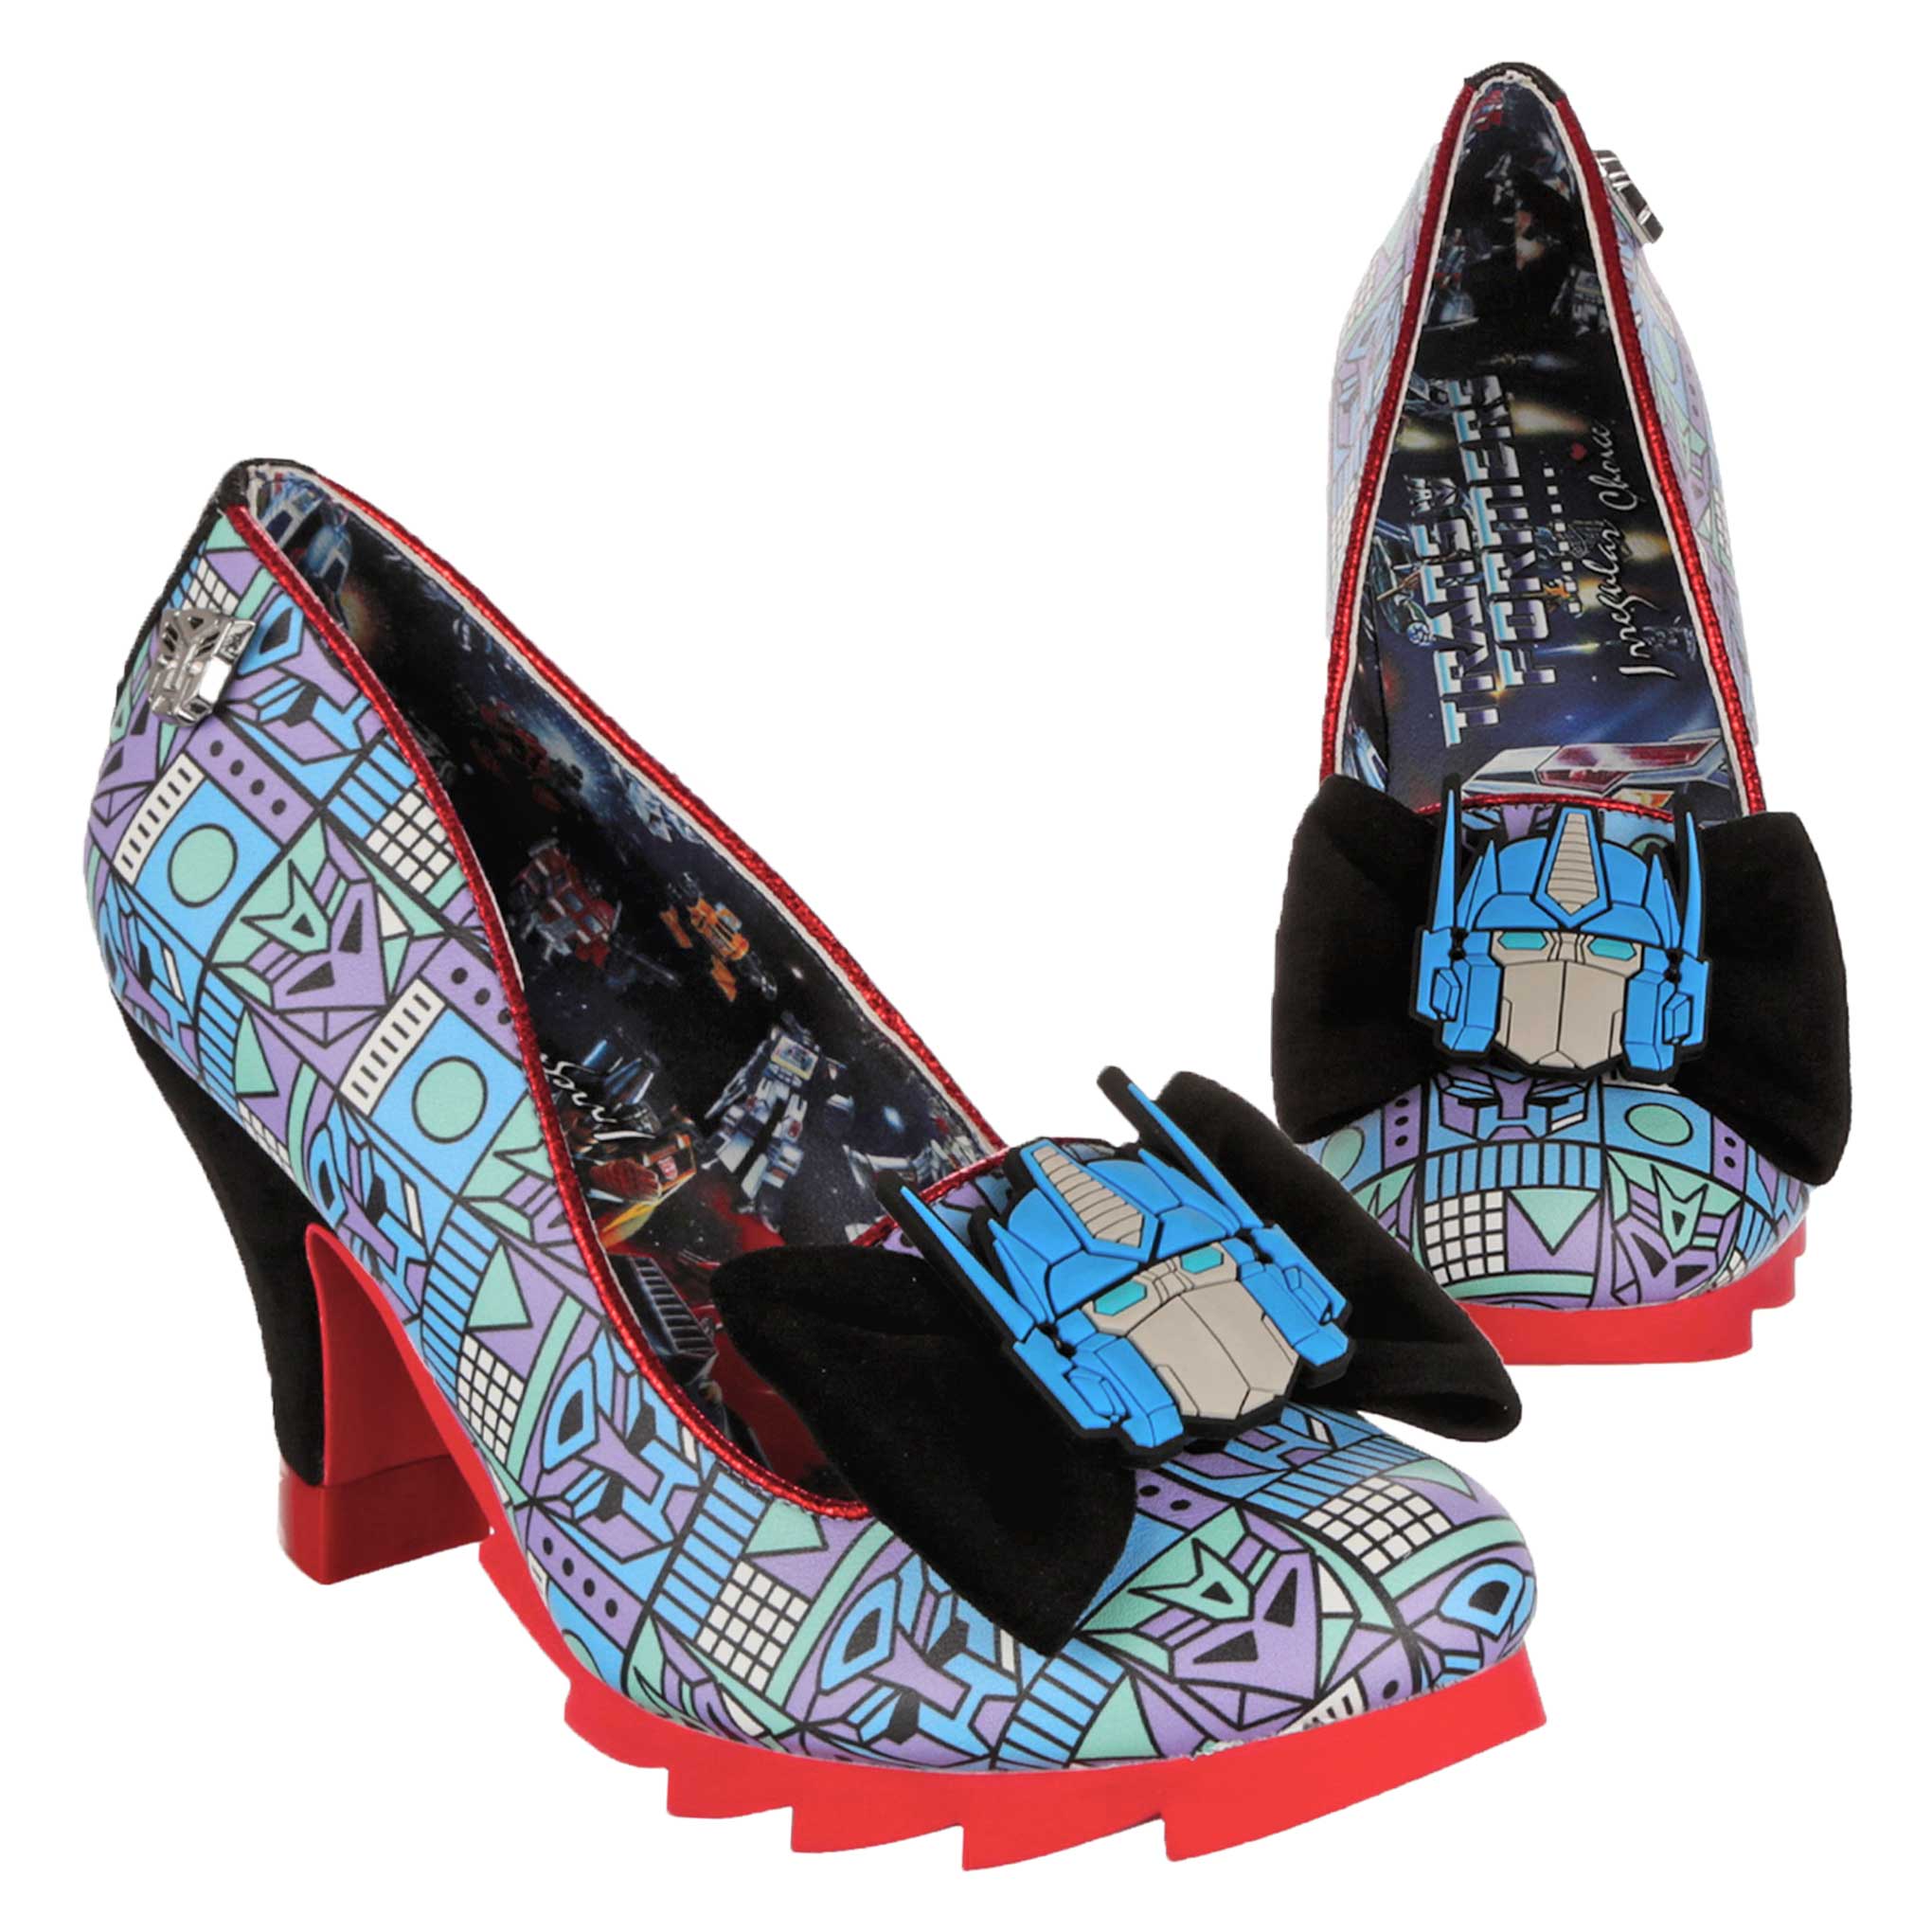 Transformers themed platform high heel shoes featuring a blue and purple geometric pattern with an Optimus Prime decal sitting on a black velveteen bow on the tow of the shoe. Red chunky platform soles contrast with the black velveteen high heel. A blue Transformers print  lines the inside of the shoe showing a classic Transformers battle scene and Transformers X Irregular Choice label. 